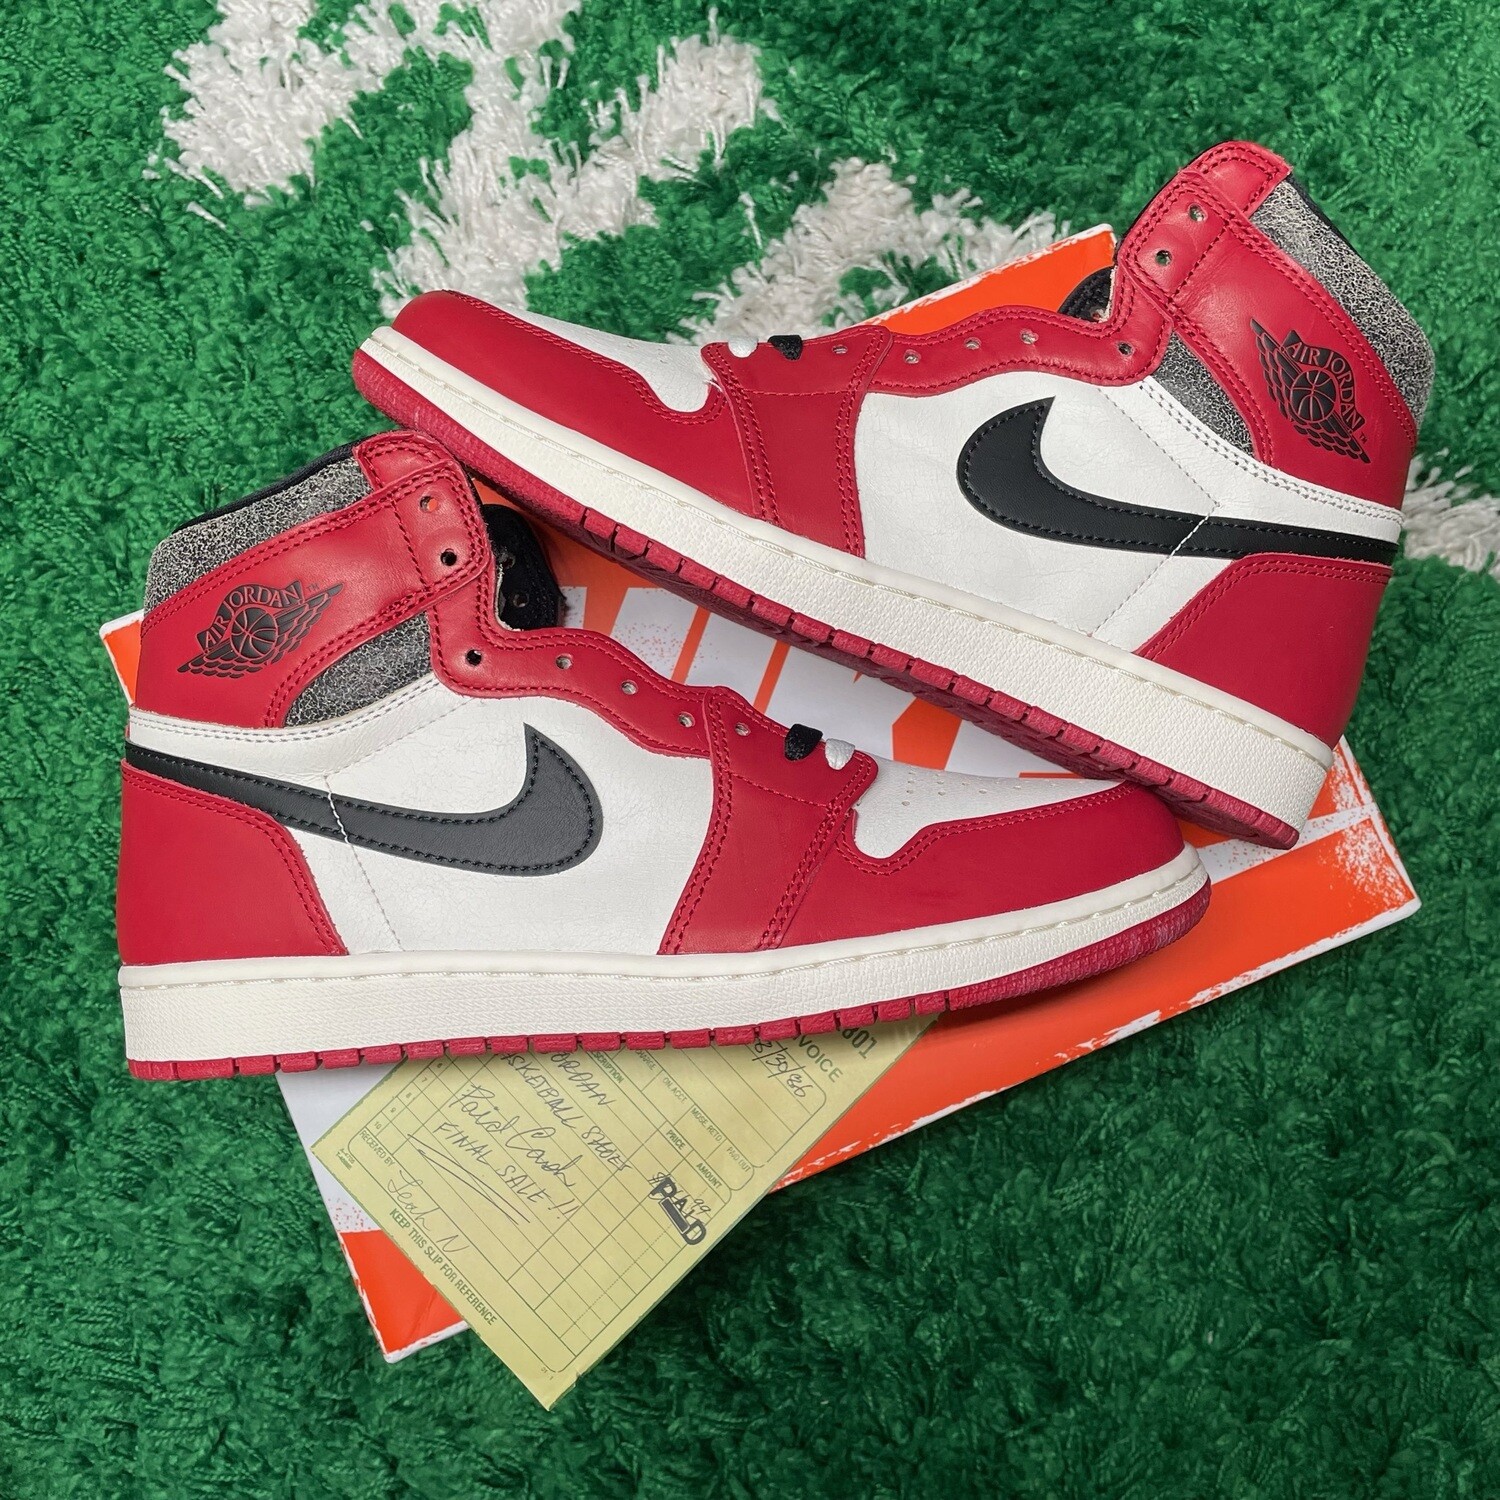 Jordan 1 Retro High OG Chicago Lost and Found Size 8M/9.5W